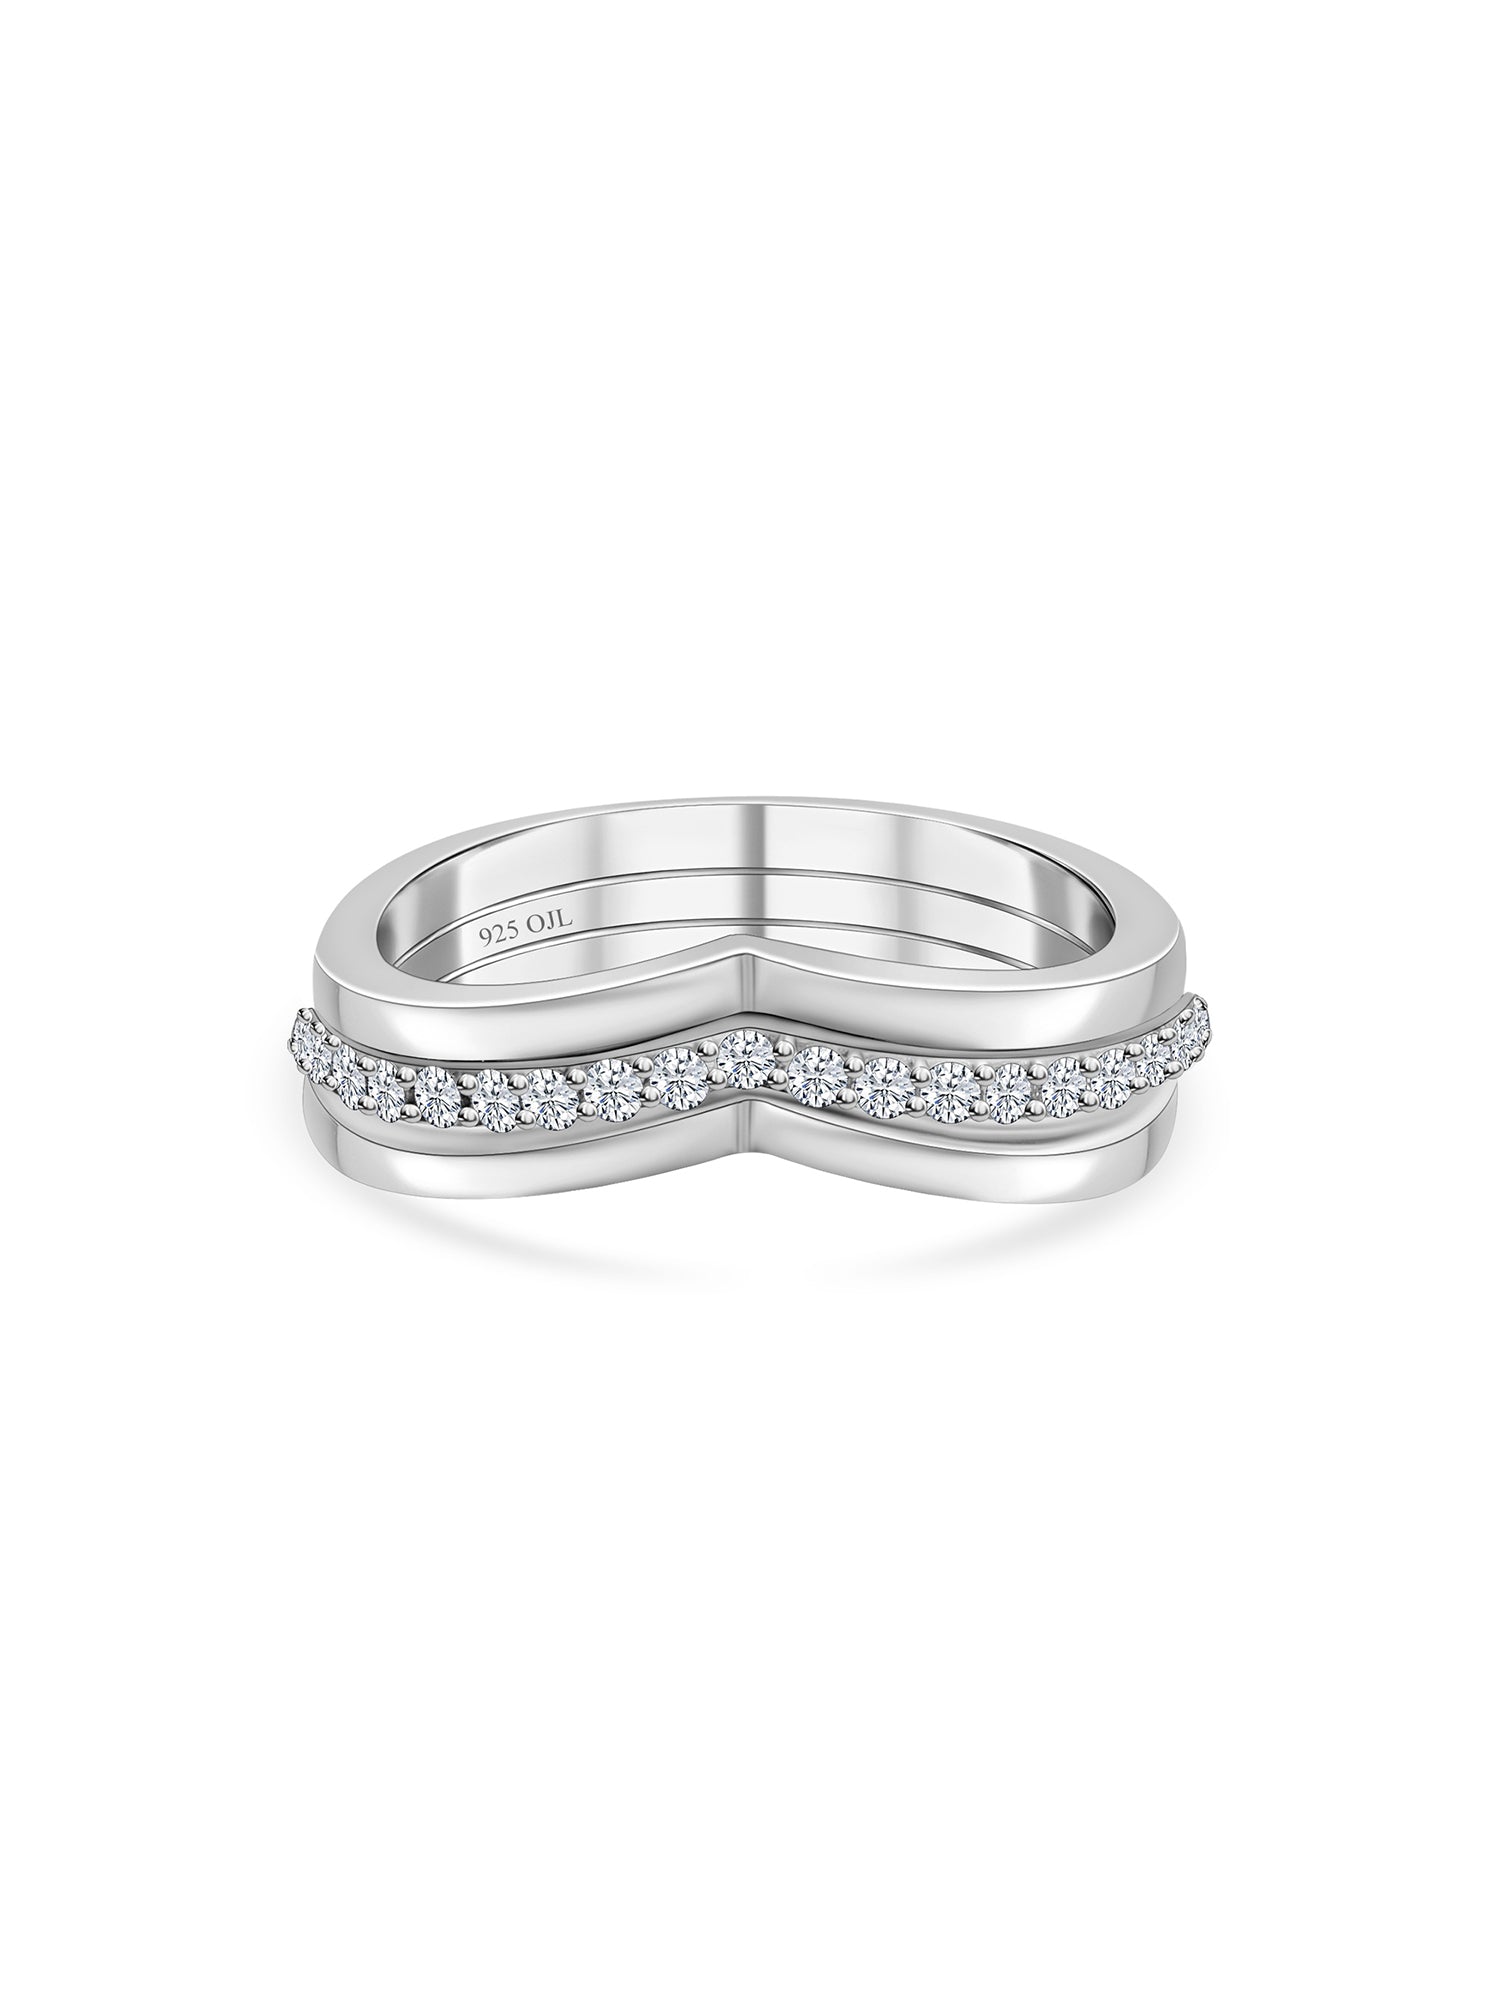 Ornate Jewels Three Band Stackable Ring Set-1